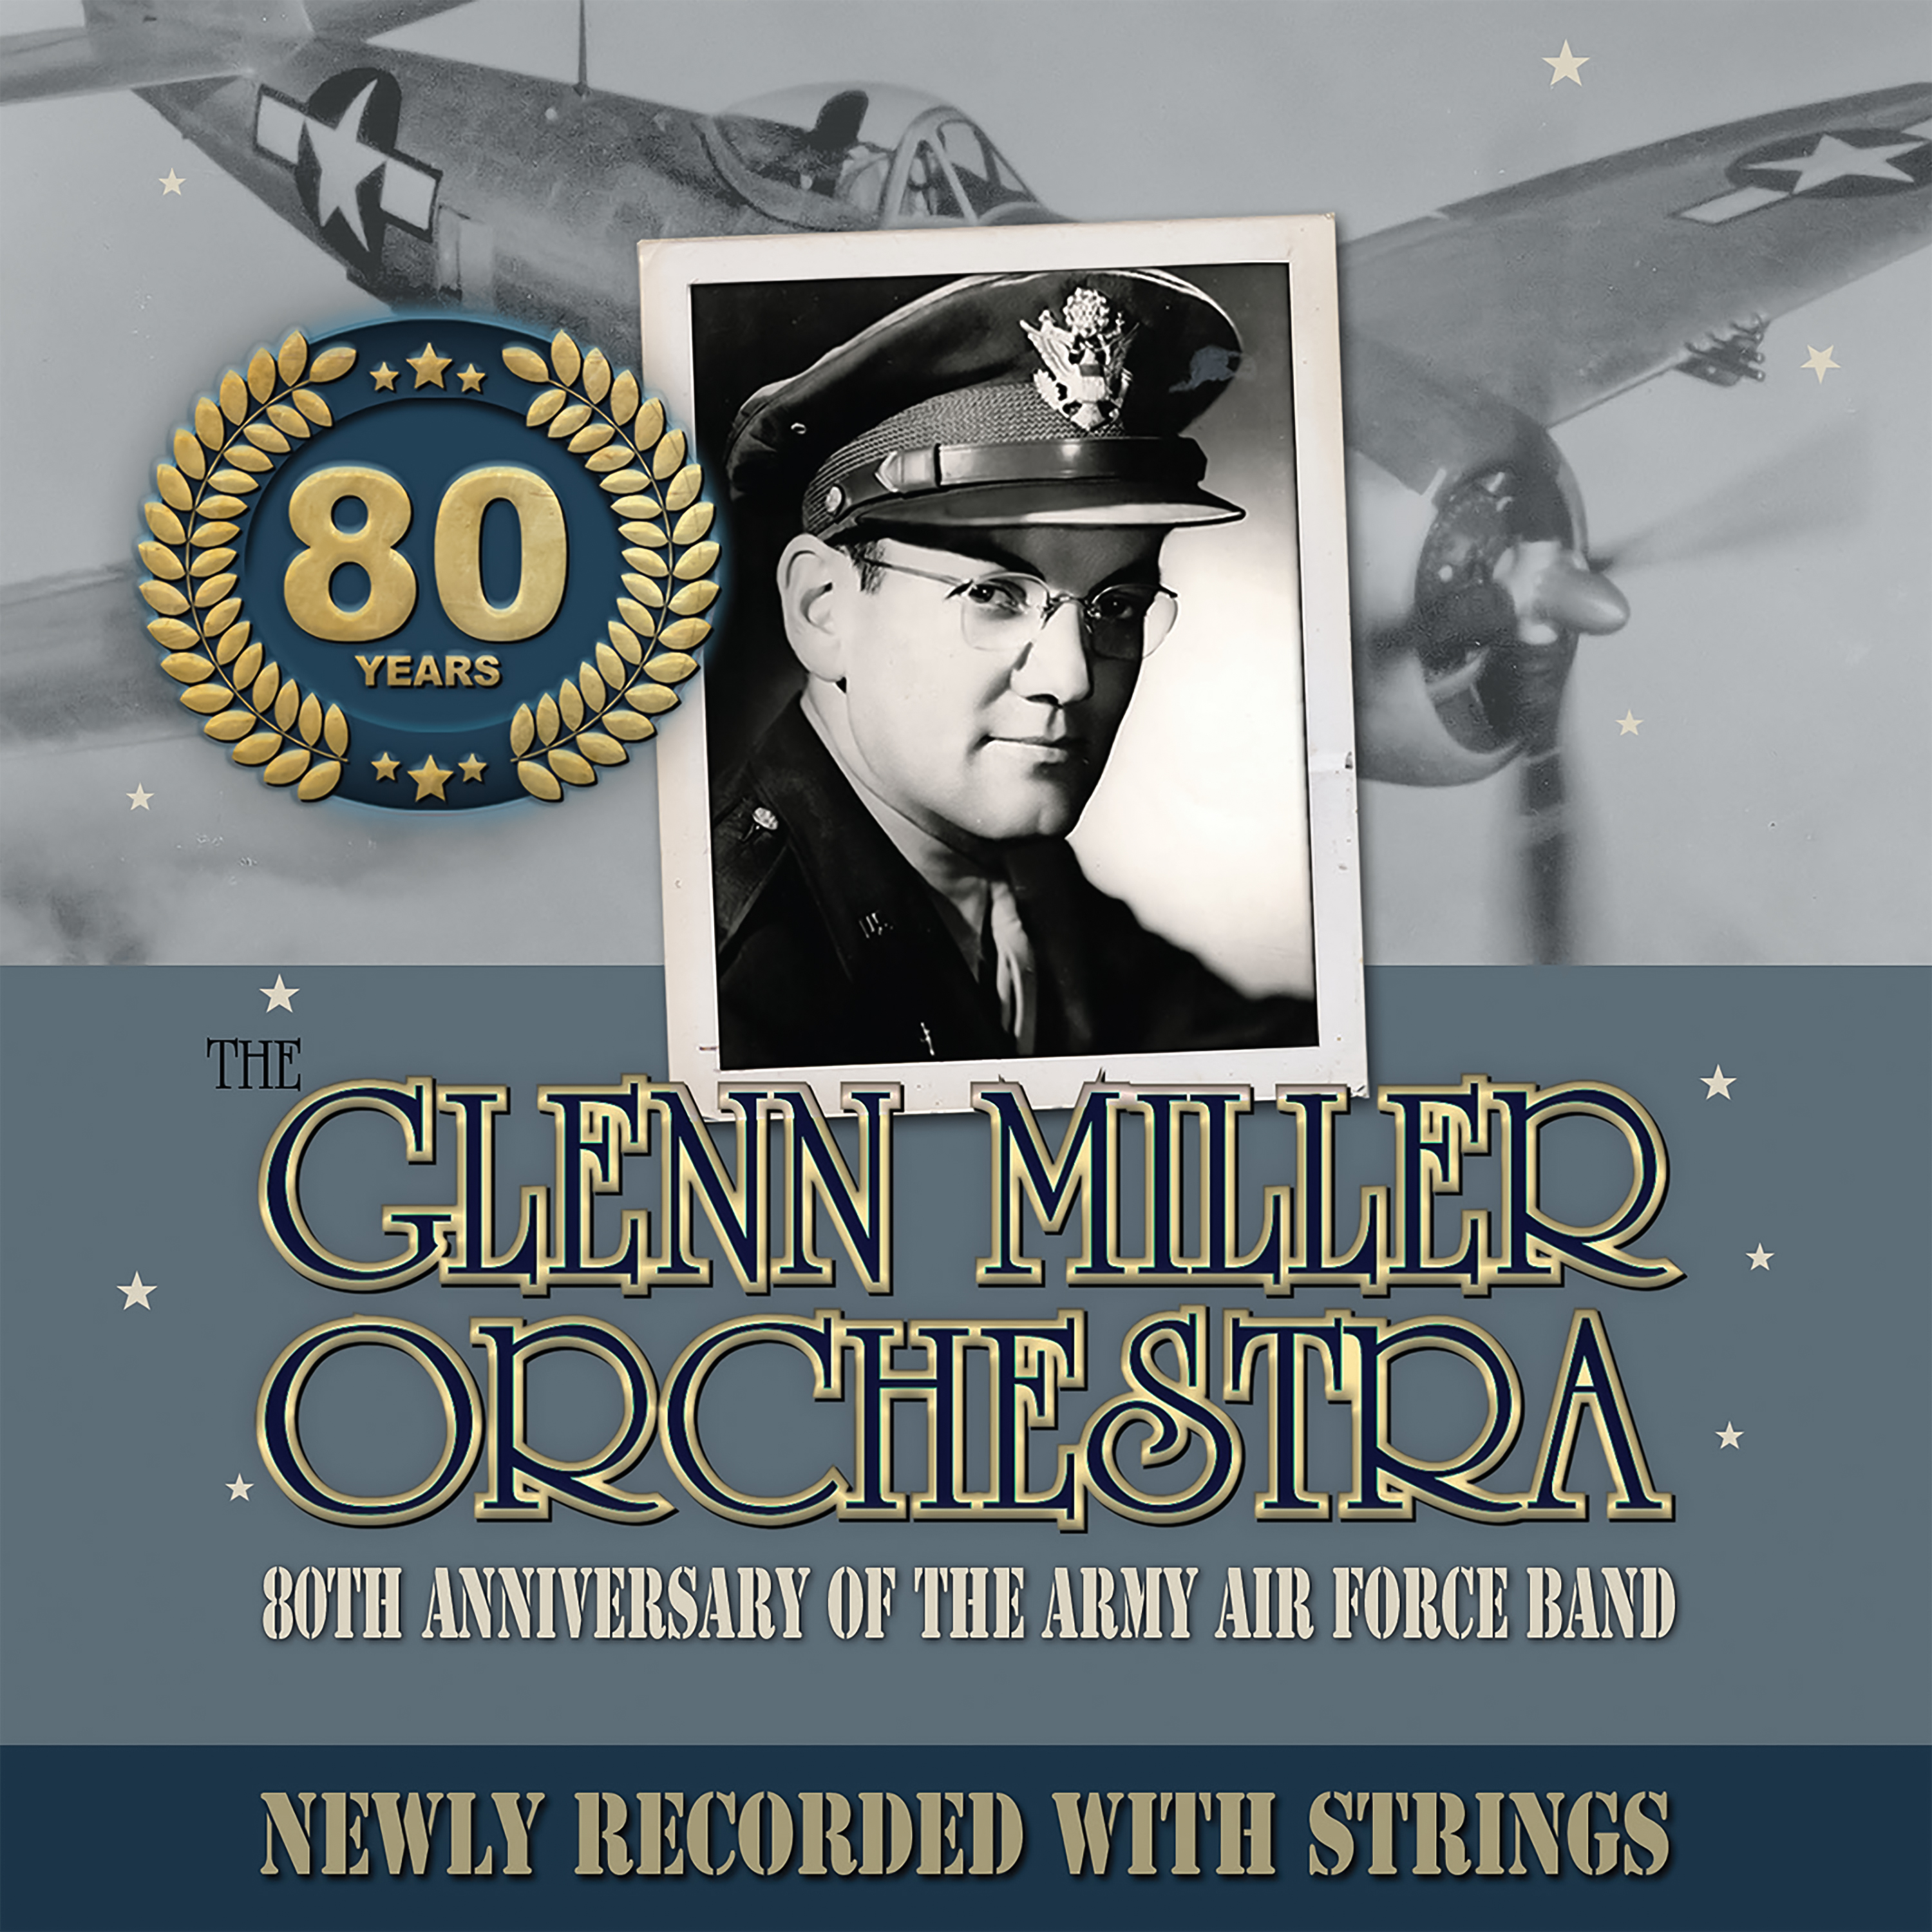 'The Glenn Miller Orchestra: 80th Anniversary Of The Army Air Force Band' Album Available Today, Newly Recorded With Strings